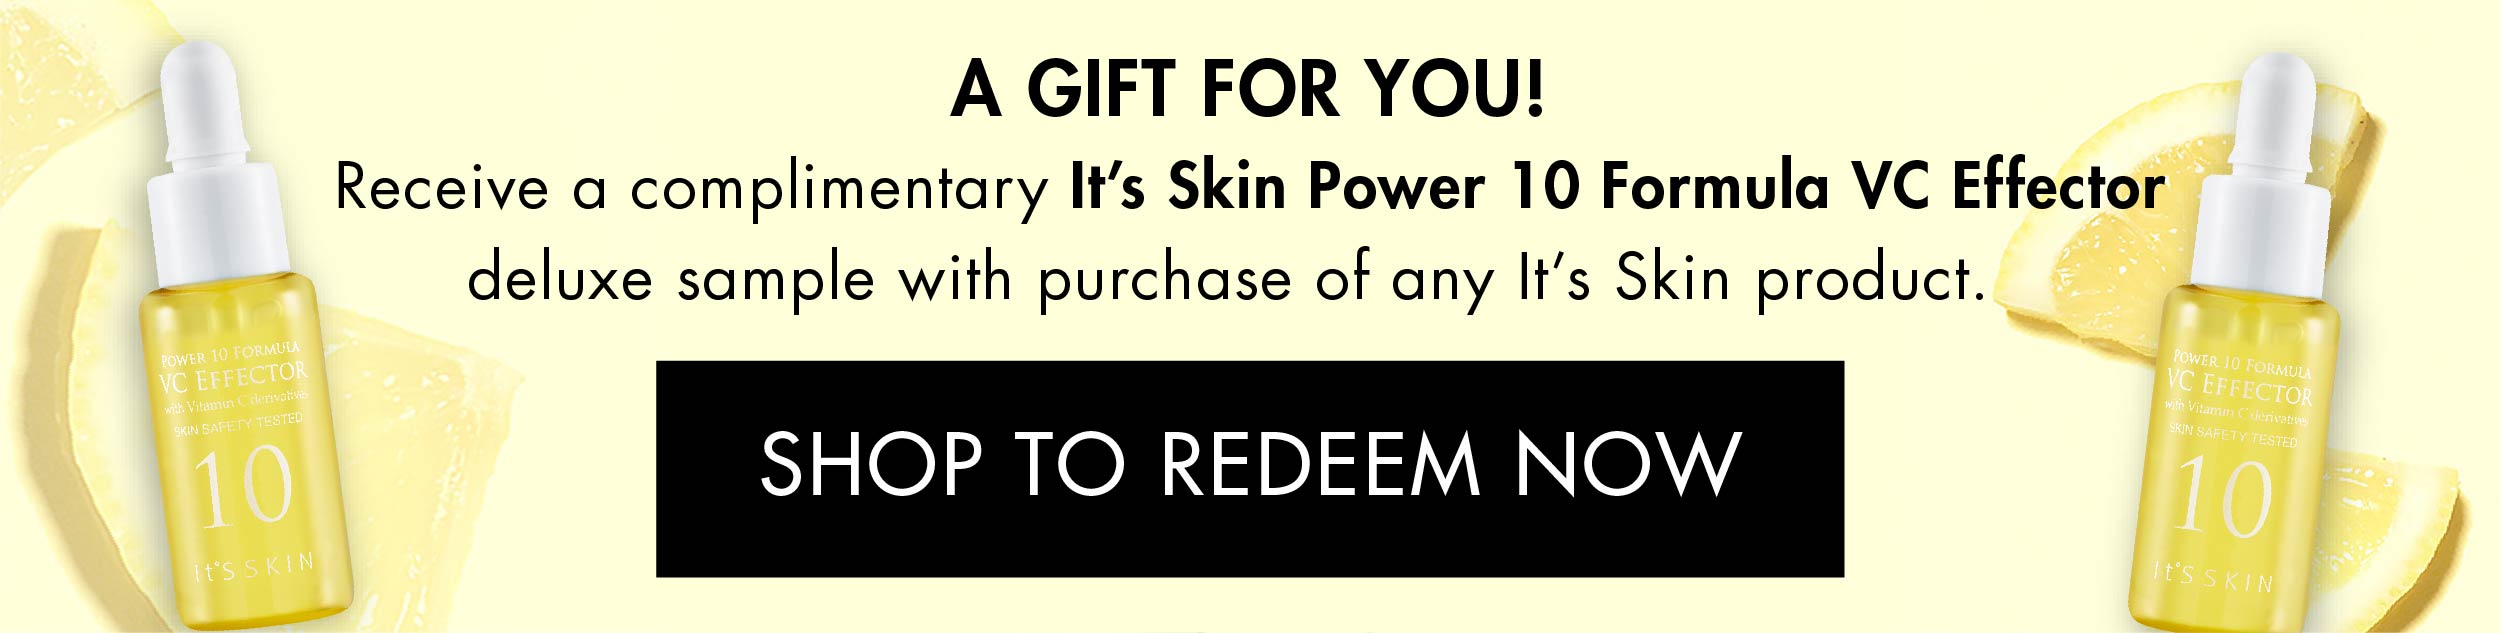 Free gift with purchase of any It's Skin product.